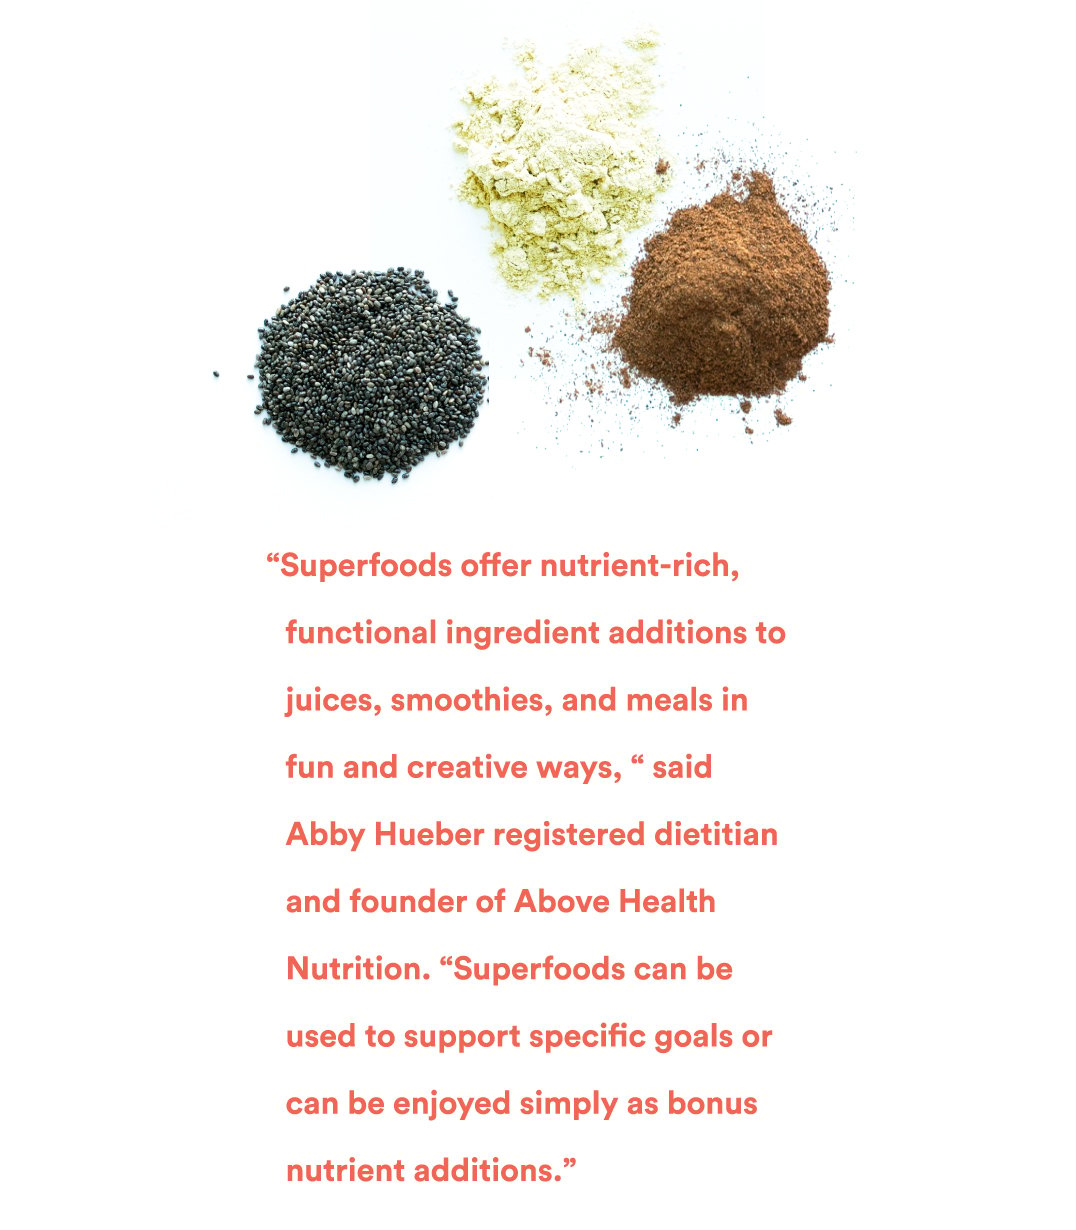 Superfoods offer nutrient rich additons to juices smoothies and meals